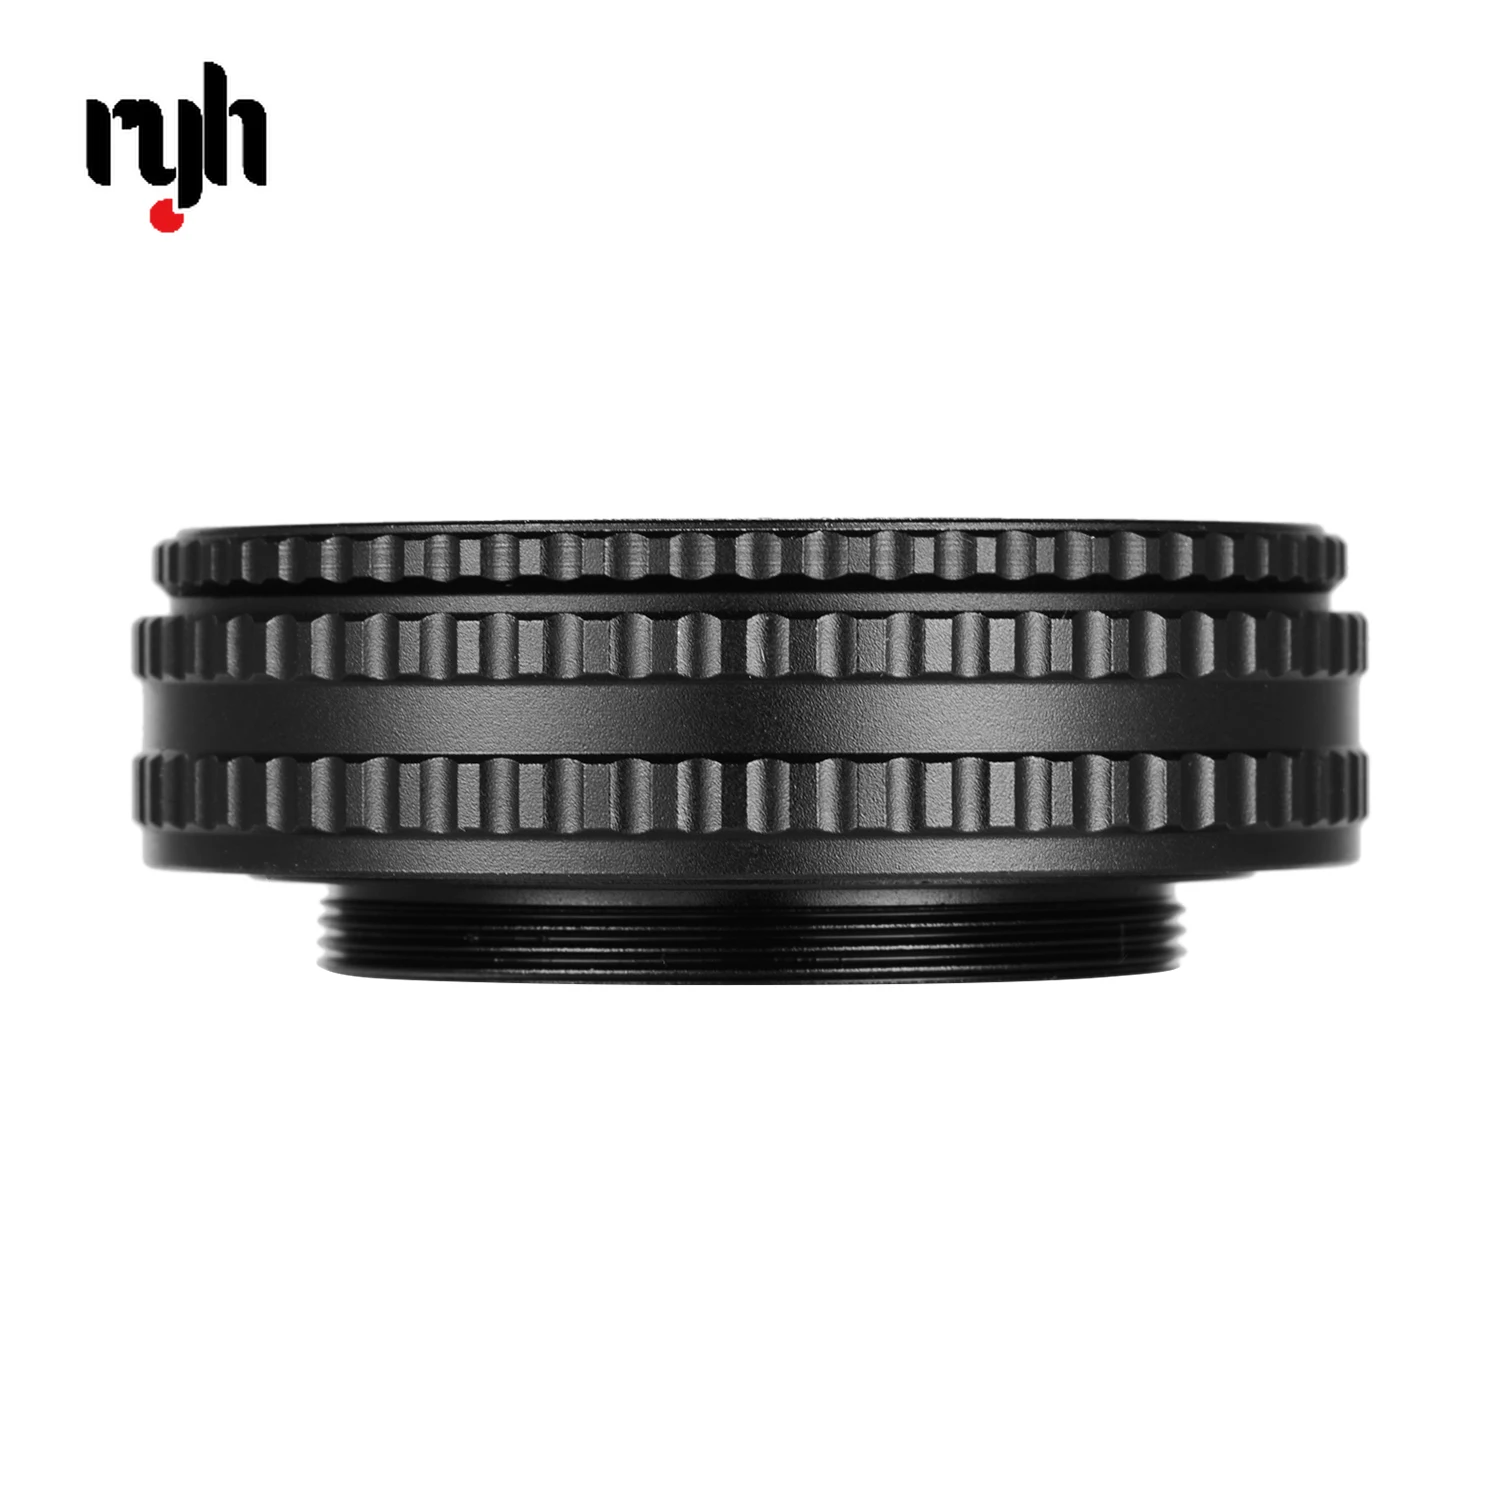 M42-M42 Photography Lens Ring Adapter M42 to M42 (17-31) (25-55) (36-90)Mount Len Focusing Helicoid Adapter Ring Macro Extension